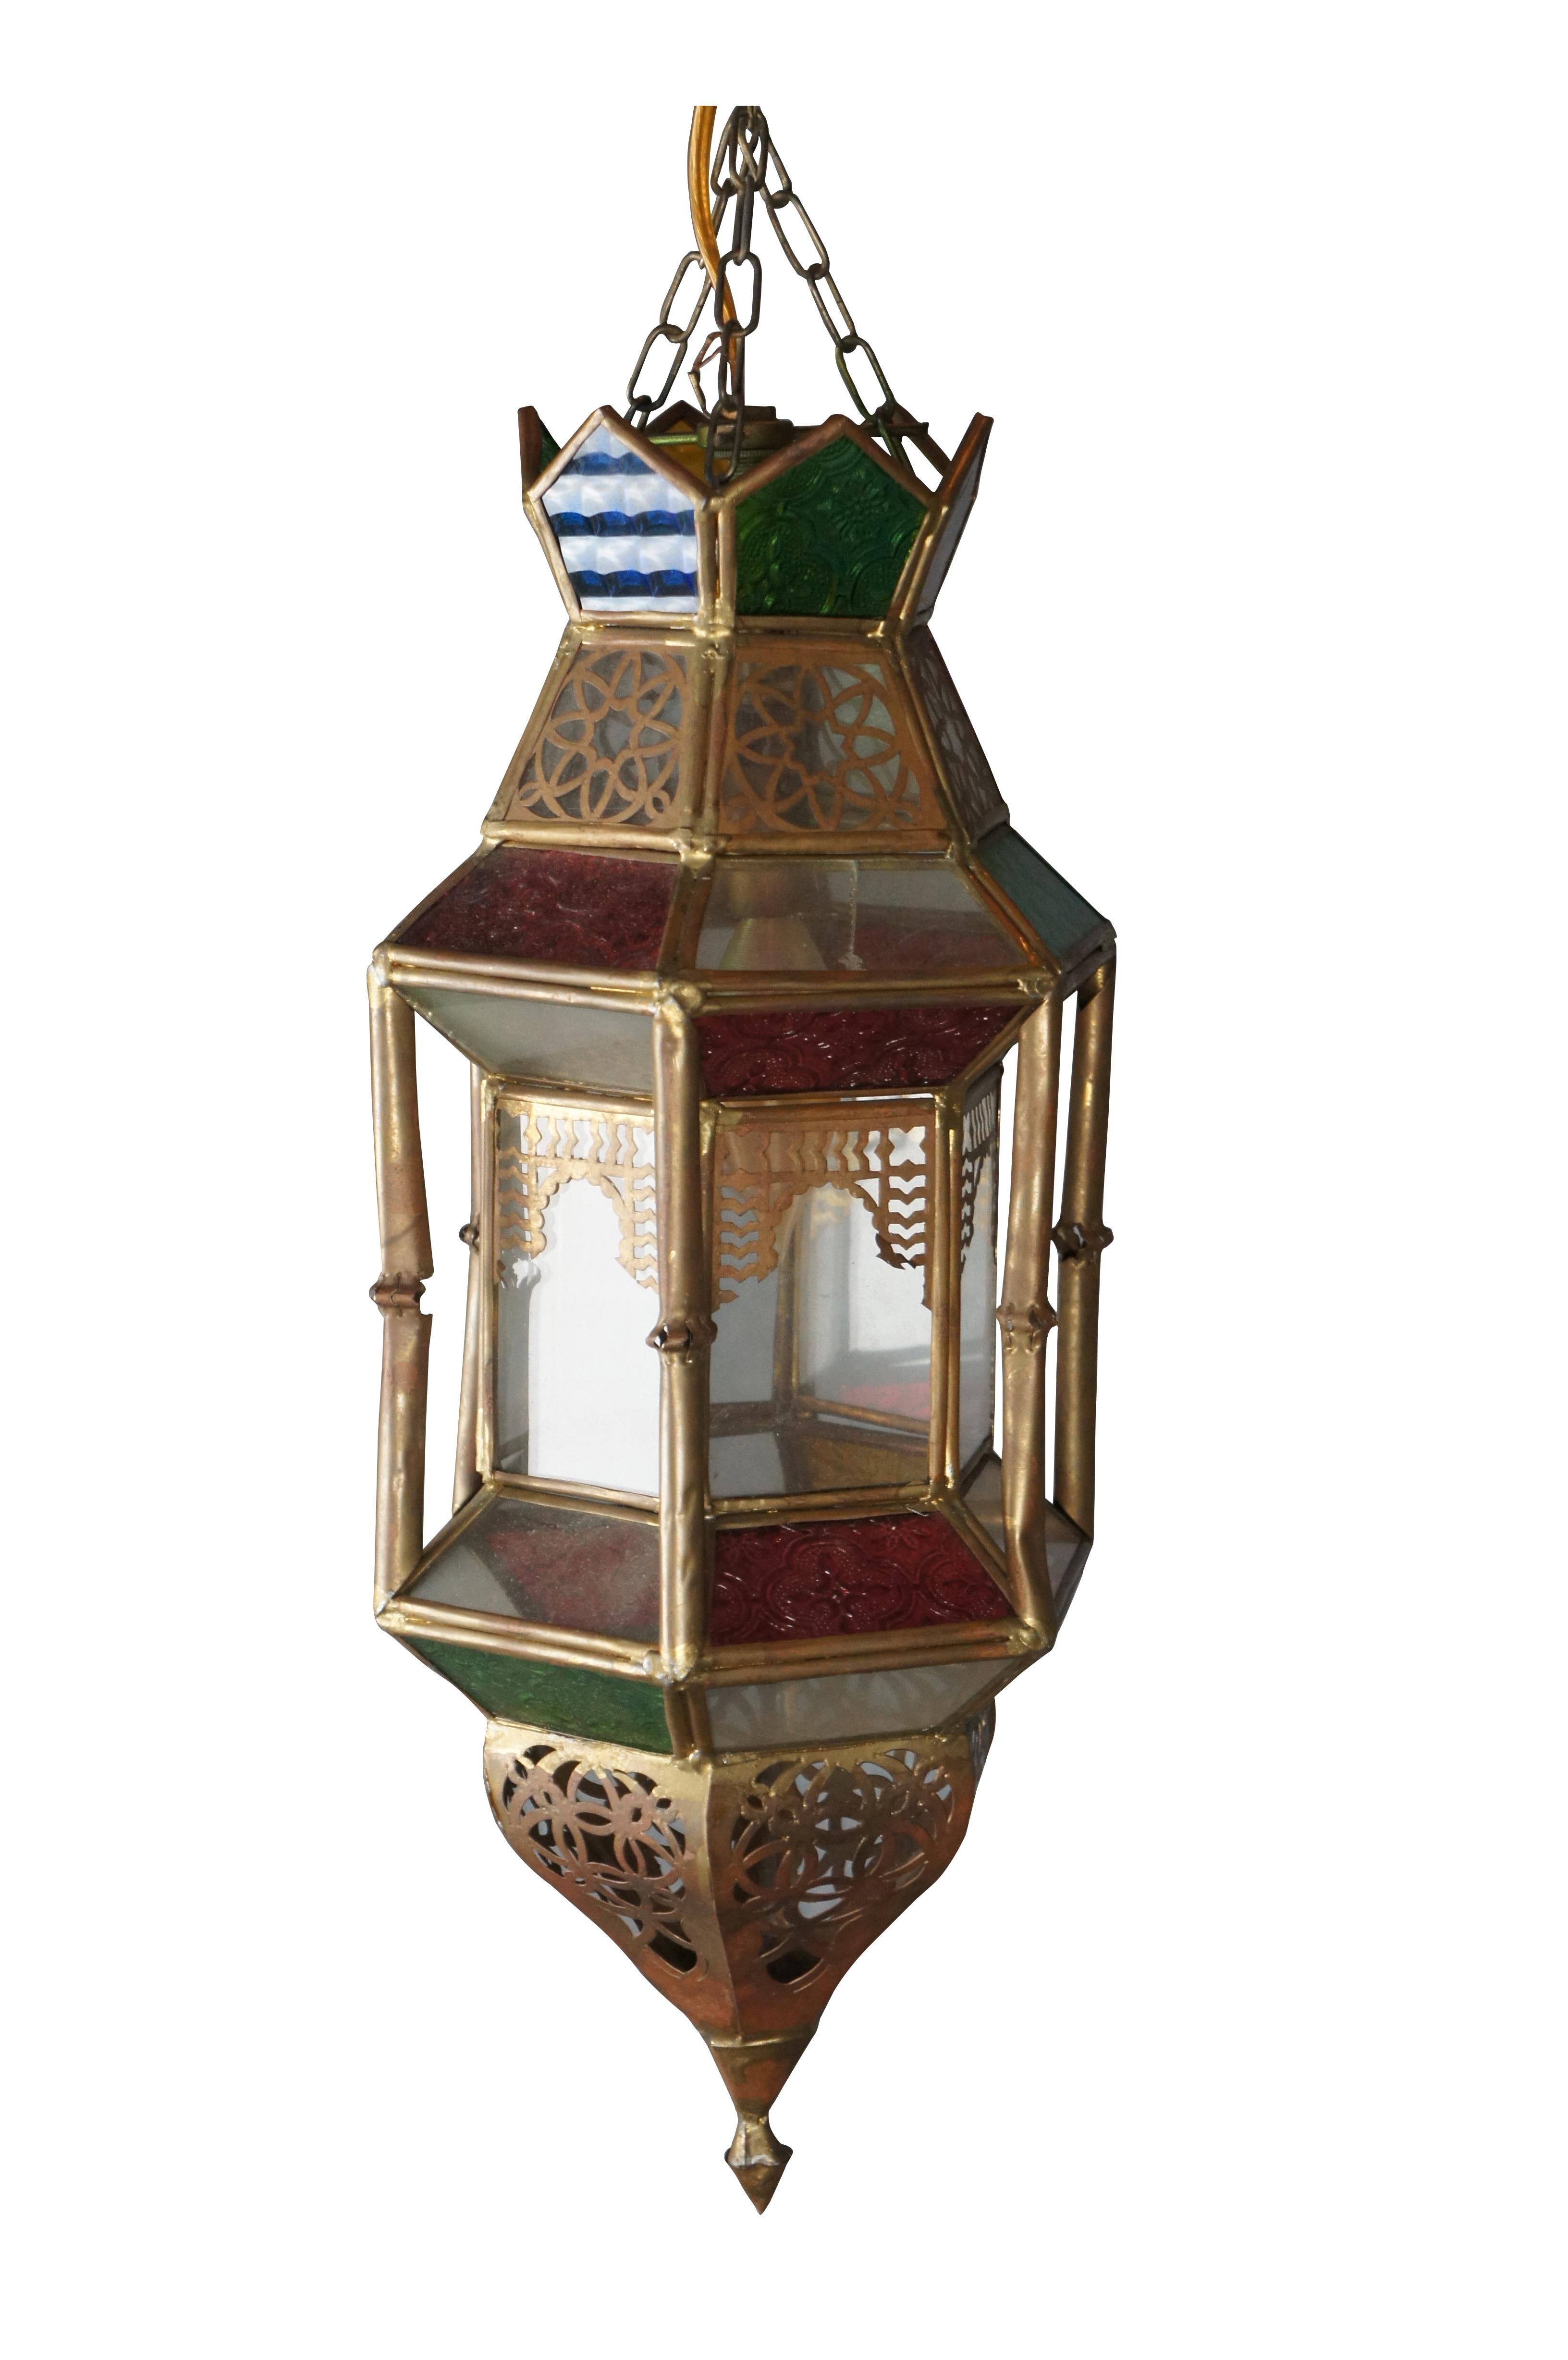 Late 20th Century Moroccan / Moorish Lantern. Made from brass with pierced / reticulated panels and colofrul slag glass. A nice pendant or swag lamp for any setting.


Dimensions:
7